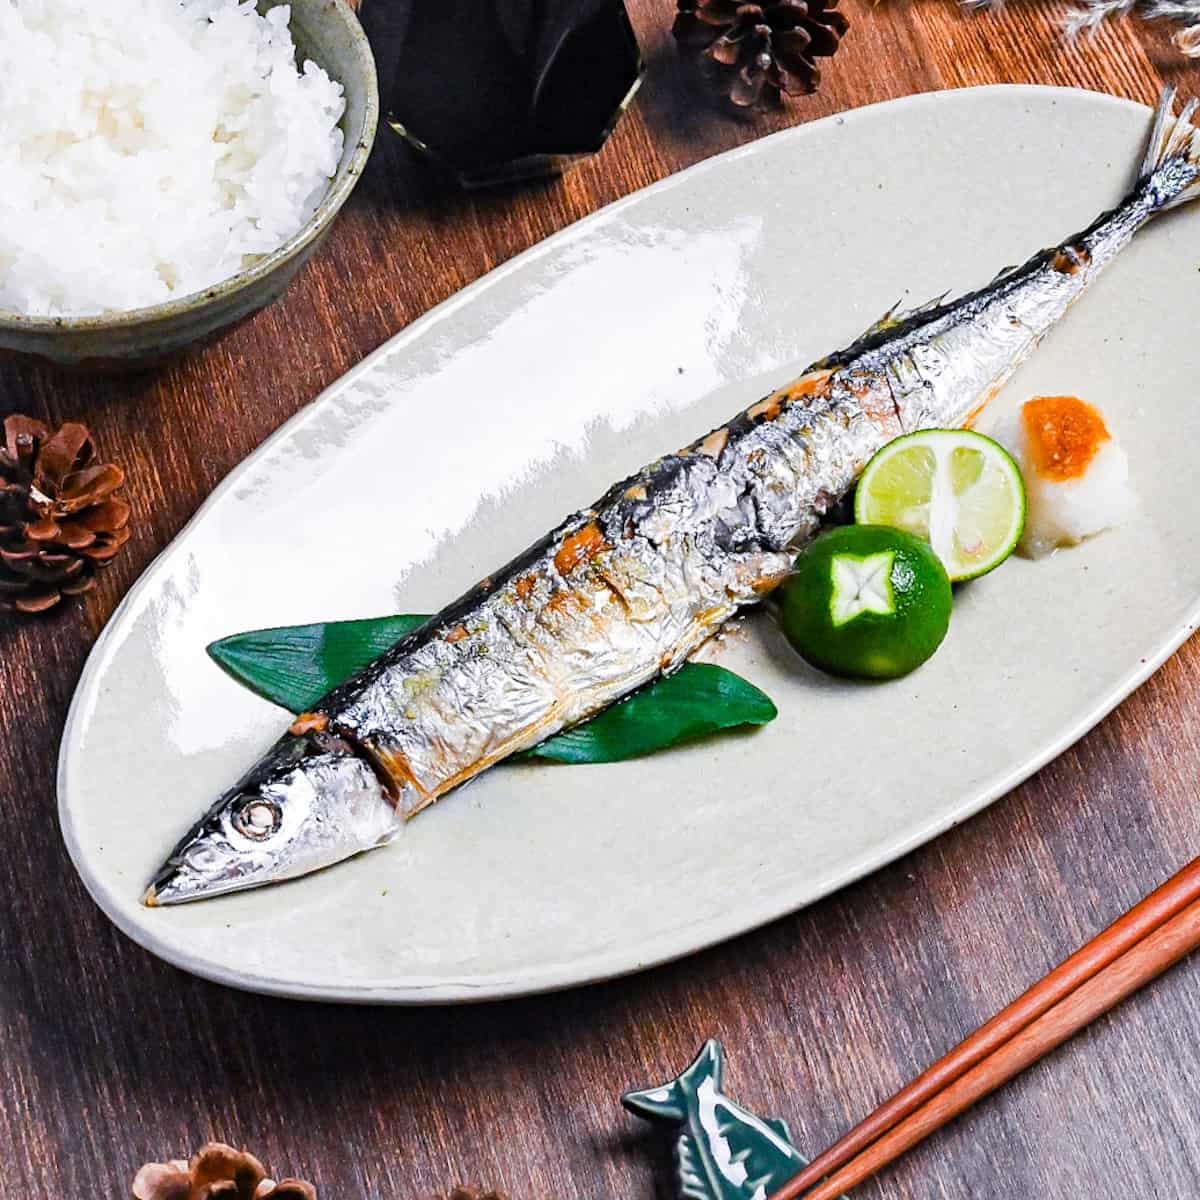 Grilled pacific saury (sanma no shioyaki) on a pale oval plate with grated daikon, sauce sauce and a halved sudachi